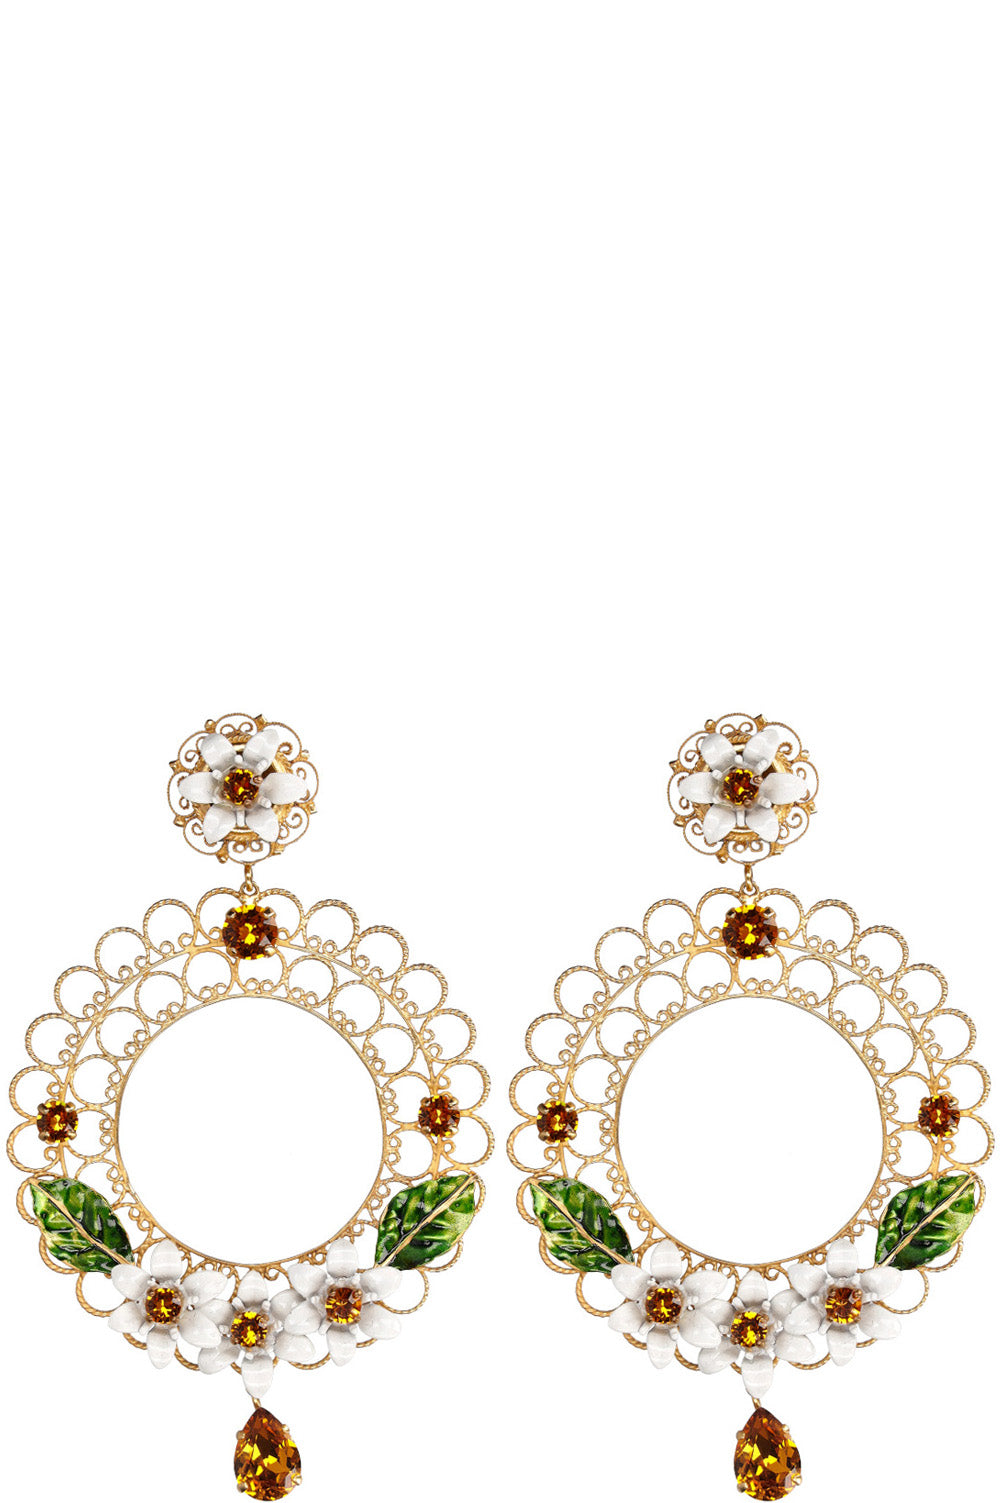 DOLCE&GABBANA Carretto Crystal Flower Earrings Gold